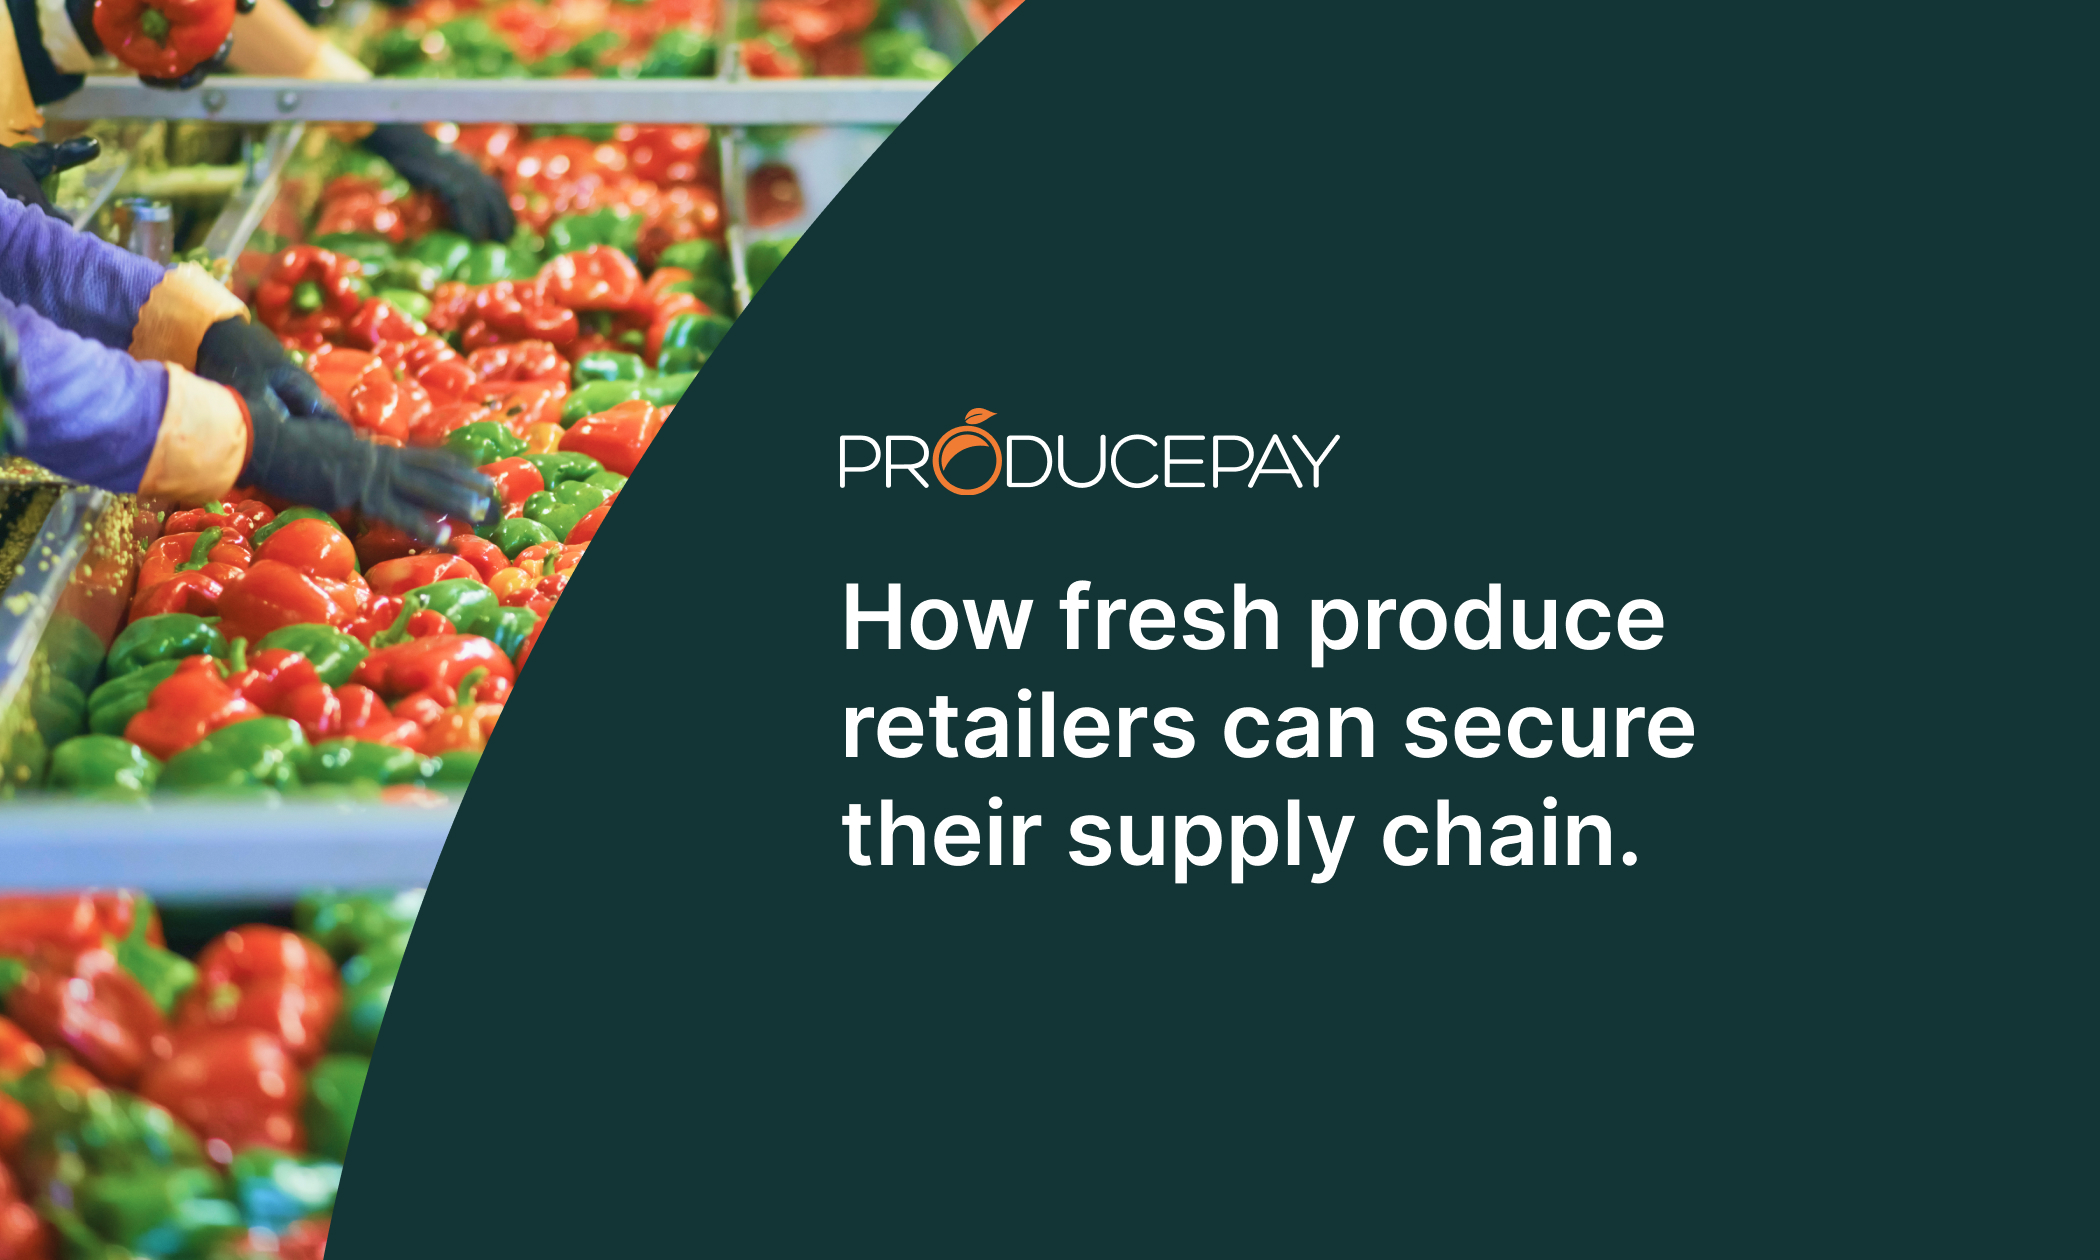 How fresh produce retailers can secure their supply chain